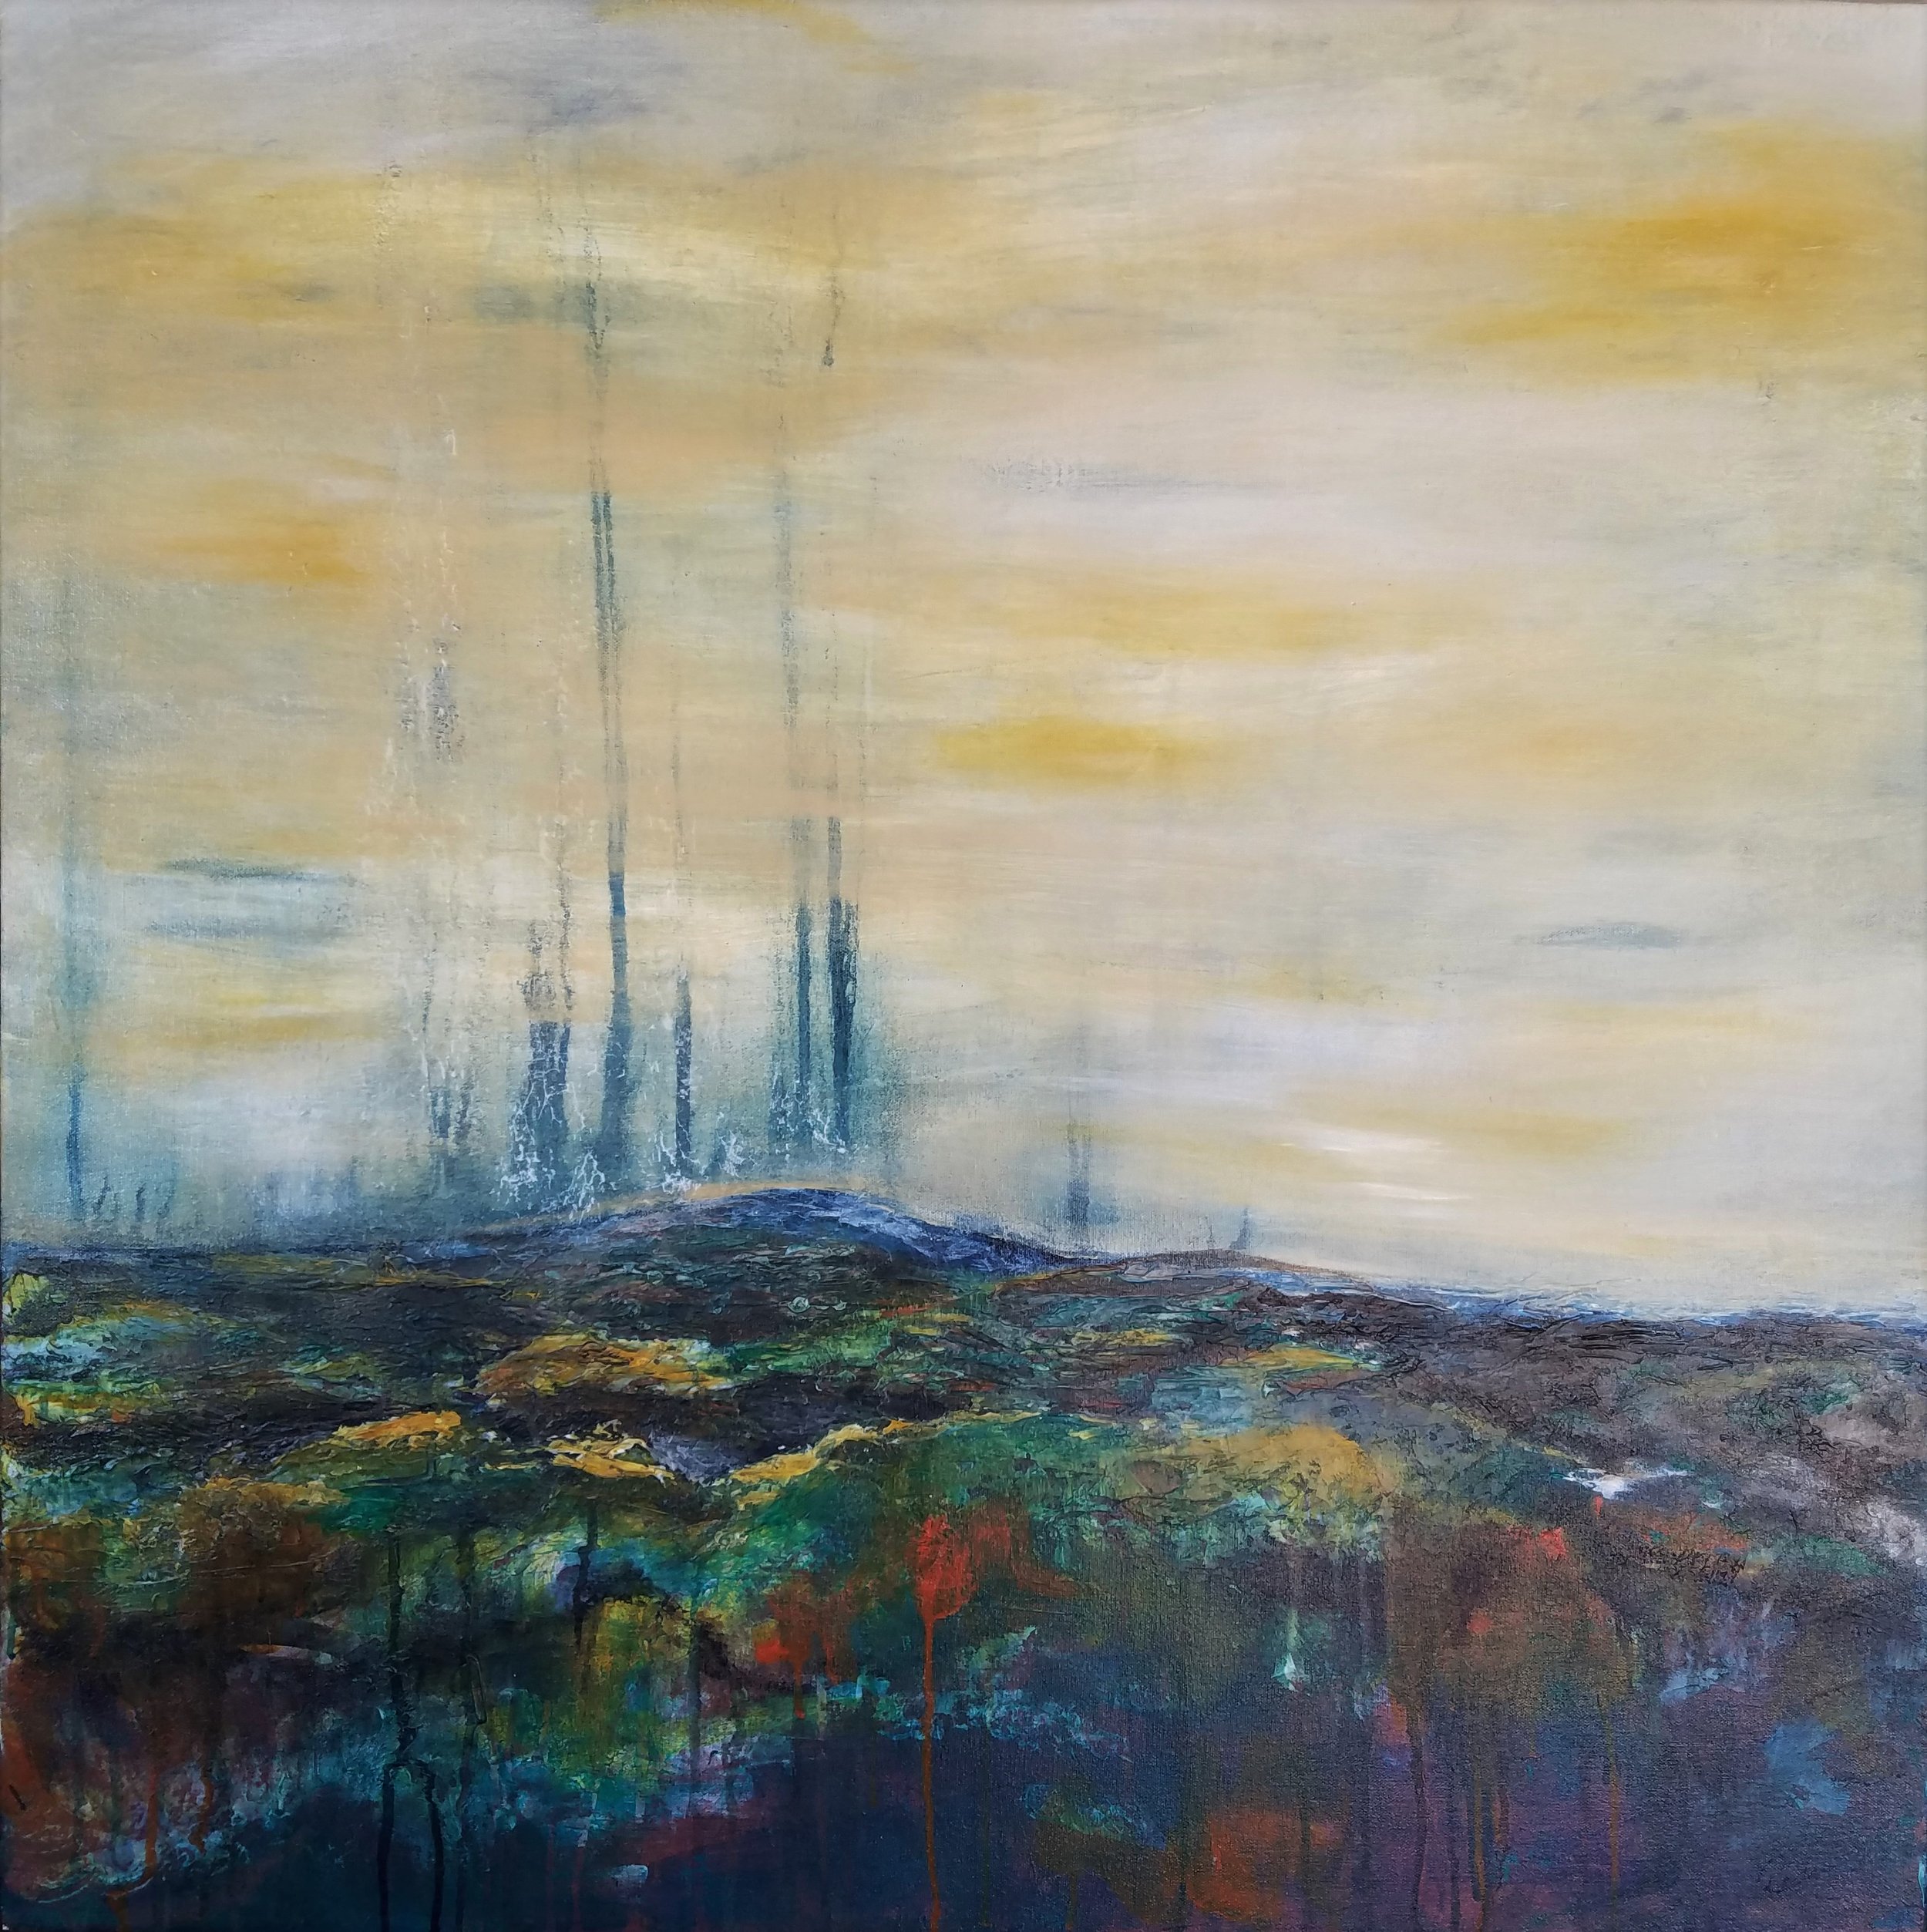 BEYOND / 36IN X 36IN